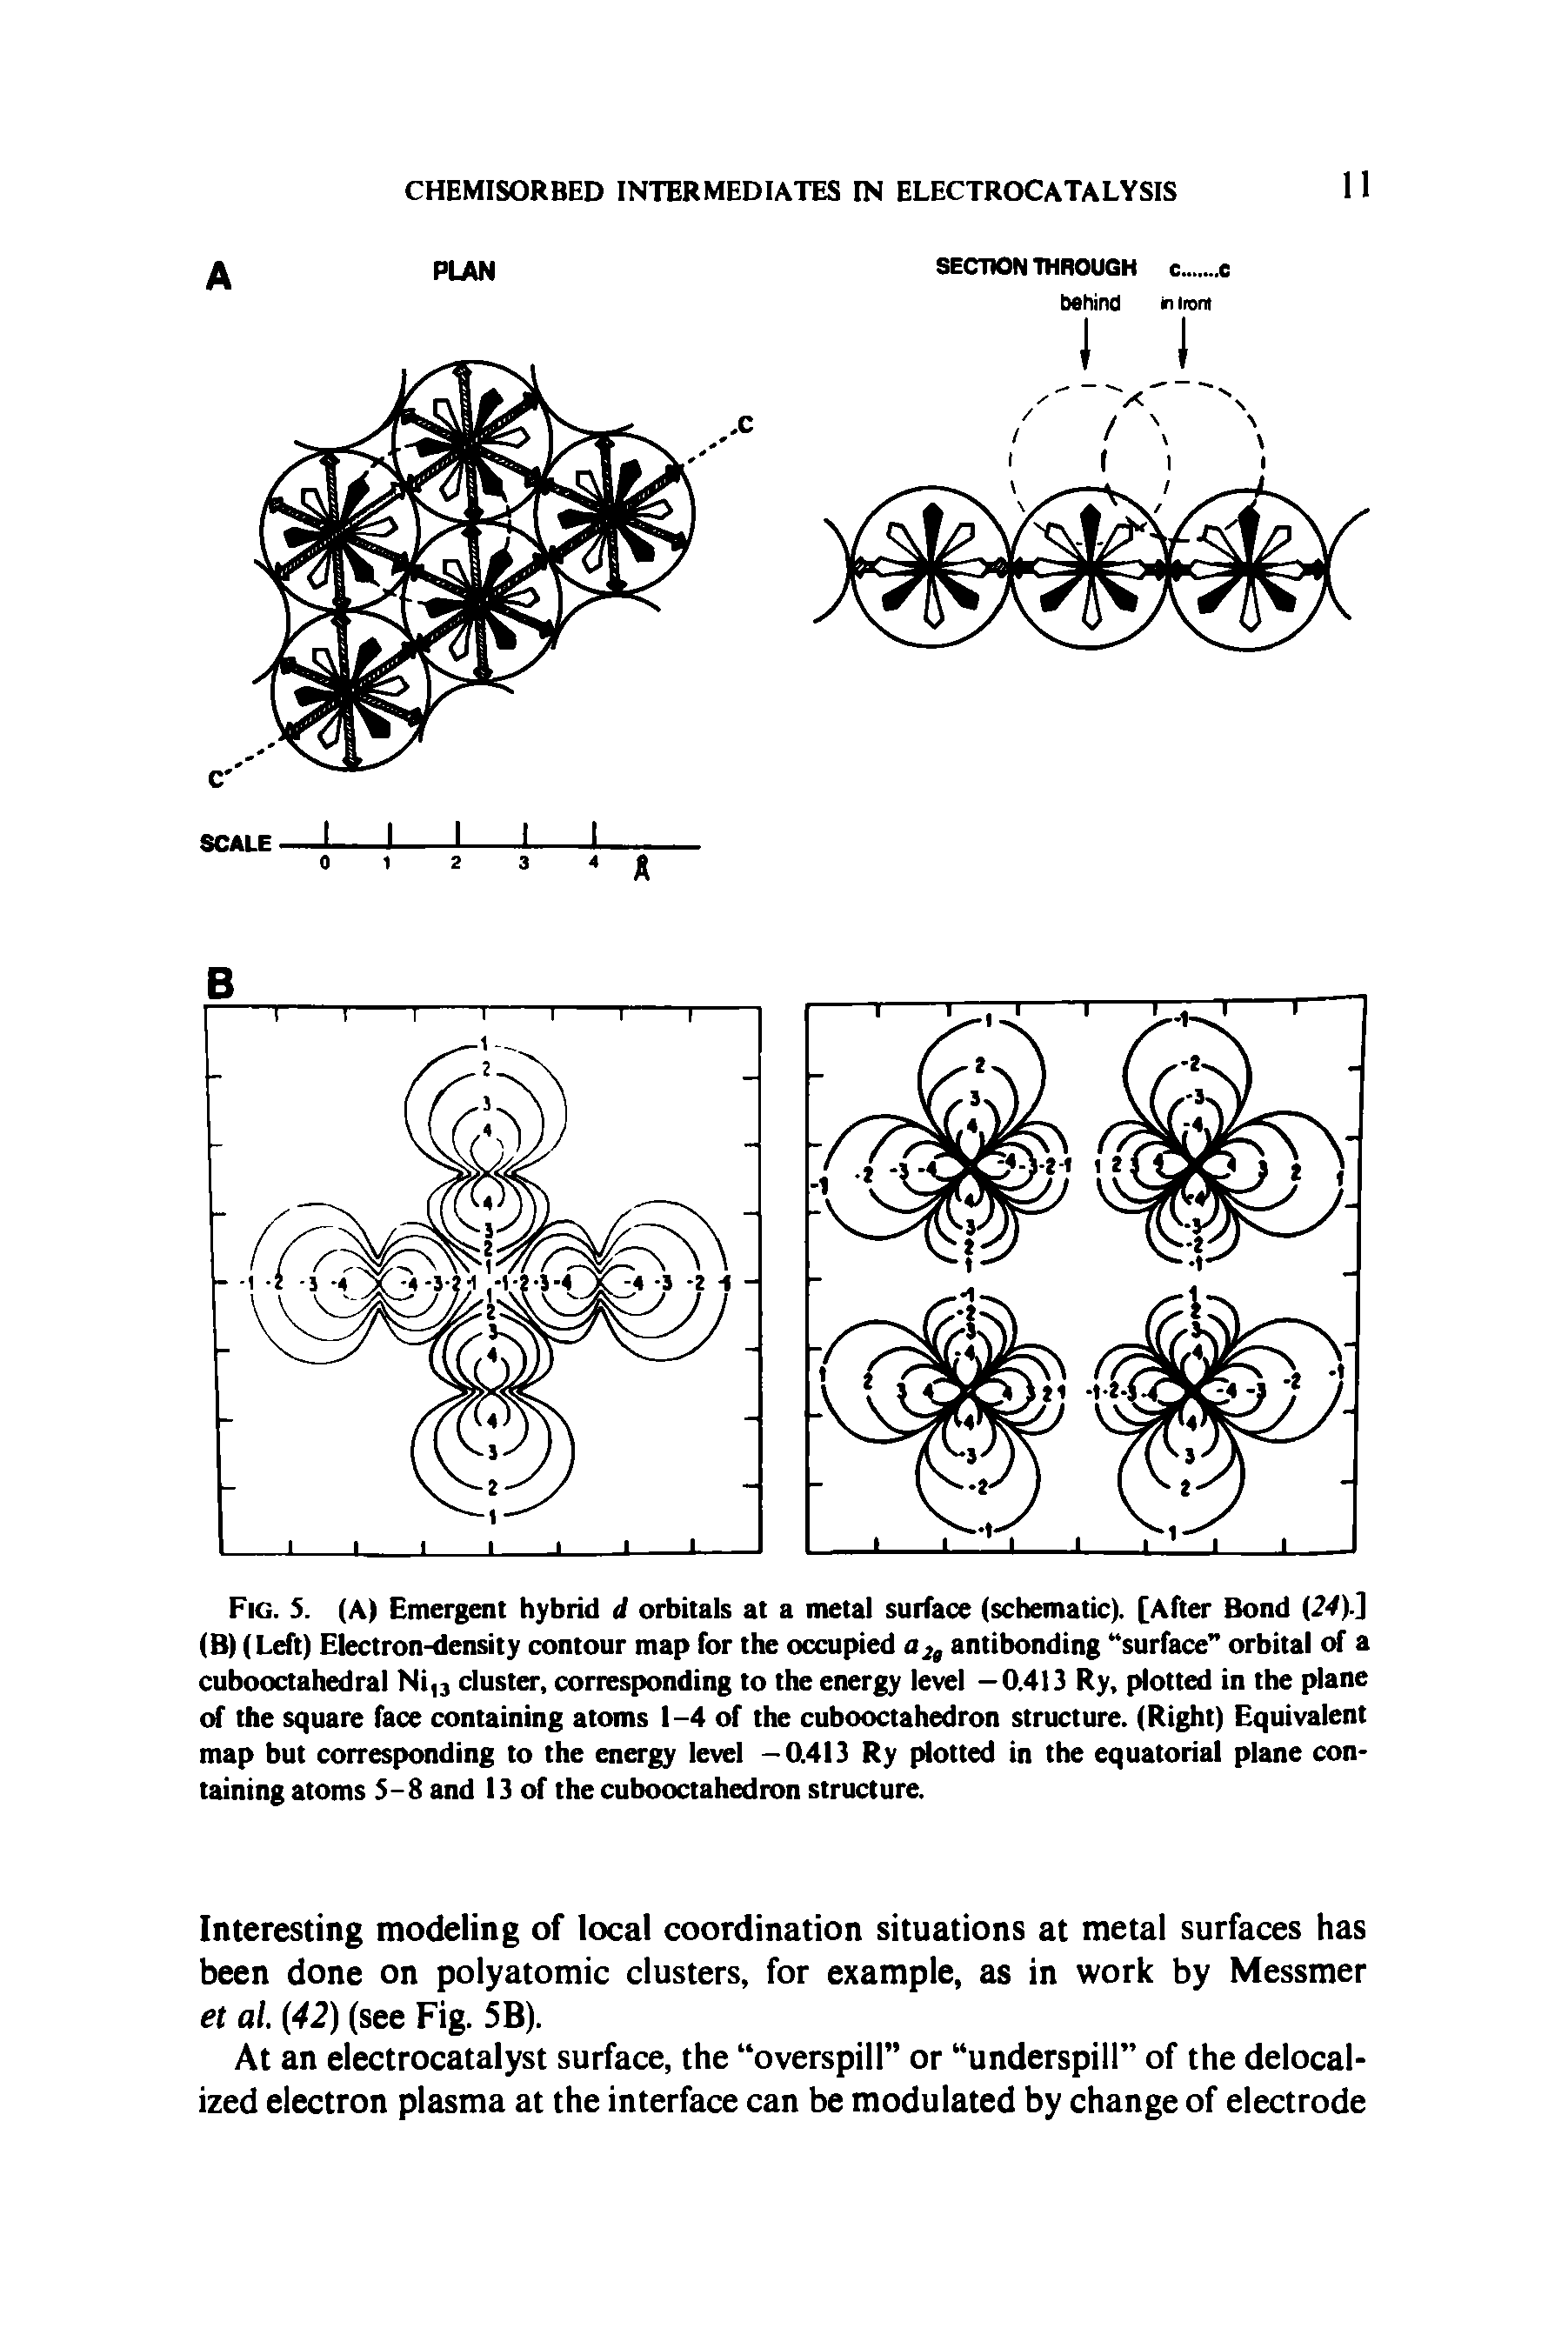 Fig. S. (A) Emergent hybrid d orbitals at a metal surface (schematic). [After Bond 24).] (B) (Left) Electron-density contour map for the occupied a2, antibonding surface orbital of a cubooctahedral Ni,3 cluster, corresponding to the energy level —0.413 Ry, plotted in the plane of the square face containing atoms 1-4 of the cubooctahedron structure. (Right) Equivalent map but corresponding to the energy level -0.413 Ry plotted in the equatorial plane containing atoms 5-8 and 13 of the cubooctahedron structure.